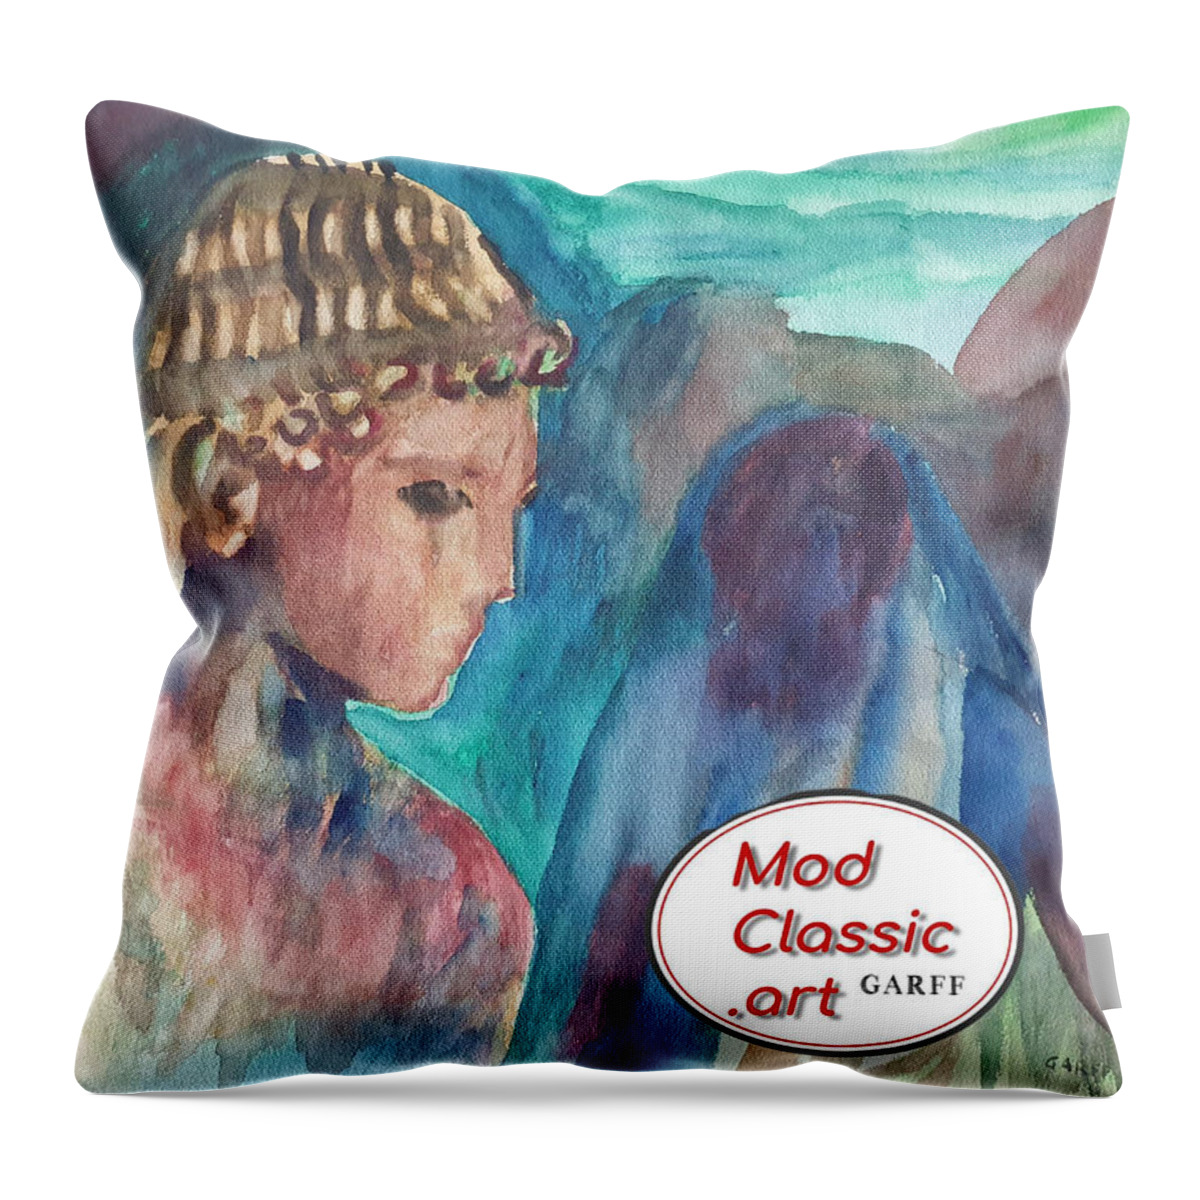 Sculpture Throw Pillow featuring the painting Youth ModClassic Art by Enrico Garff